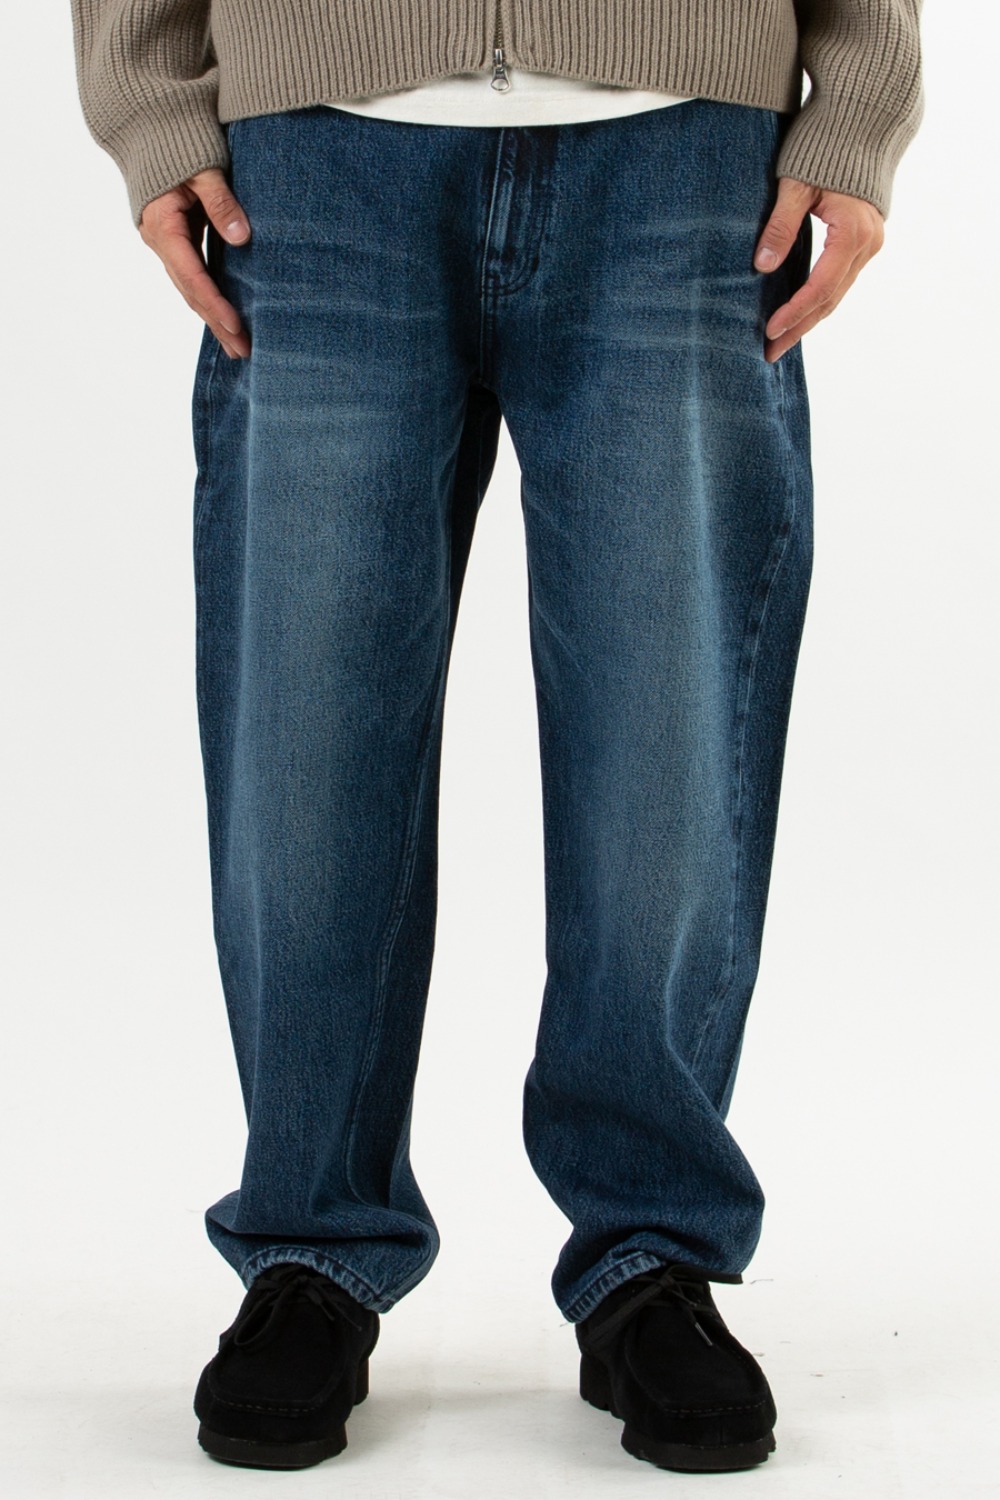 ORGANIC COTTON RELAXED DENIM PANTS - WASHED BLUE